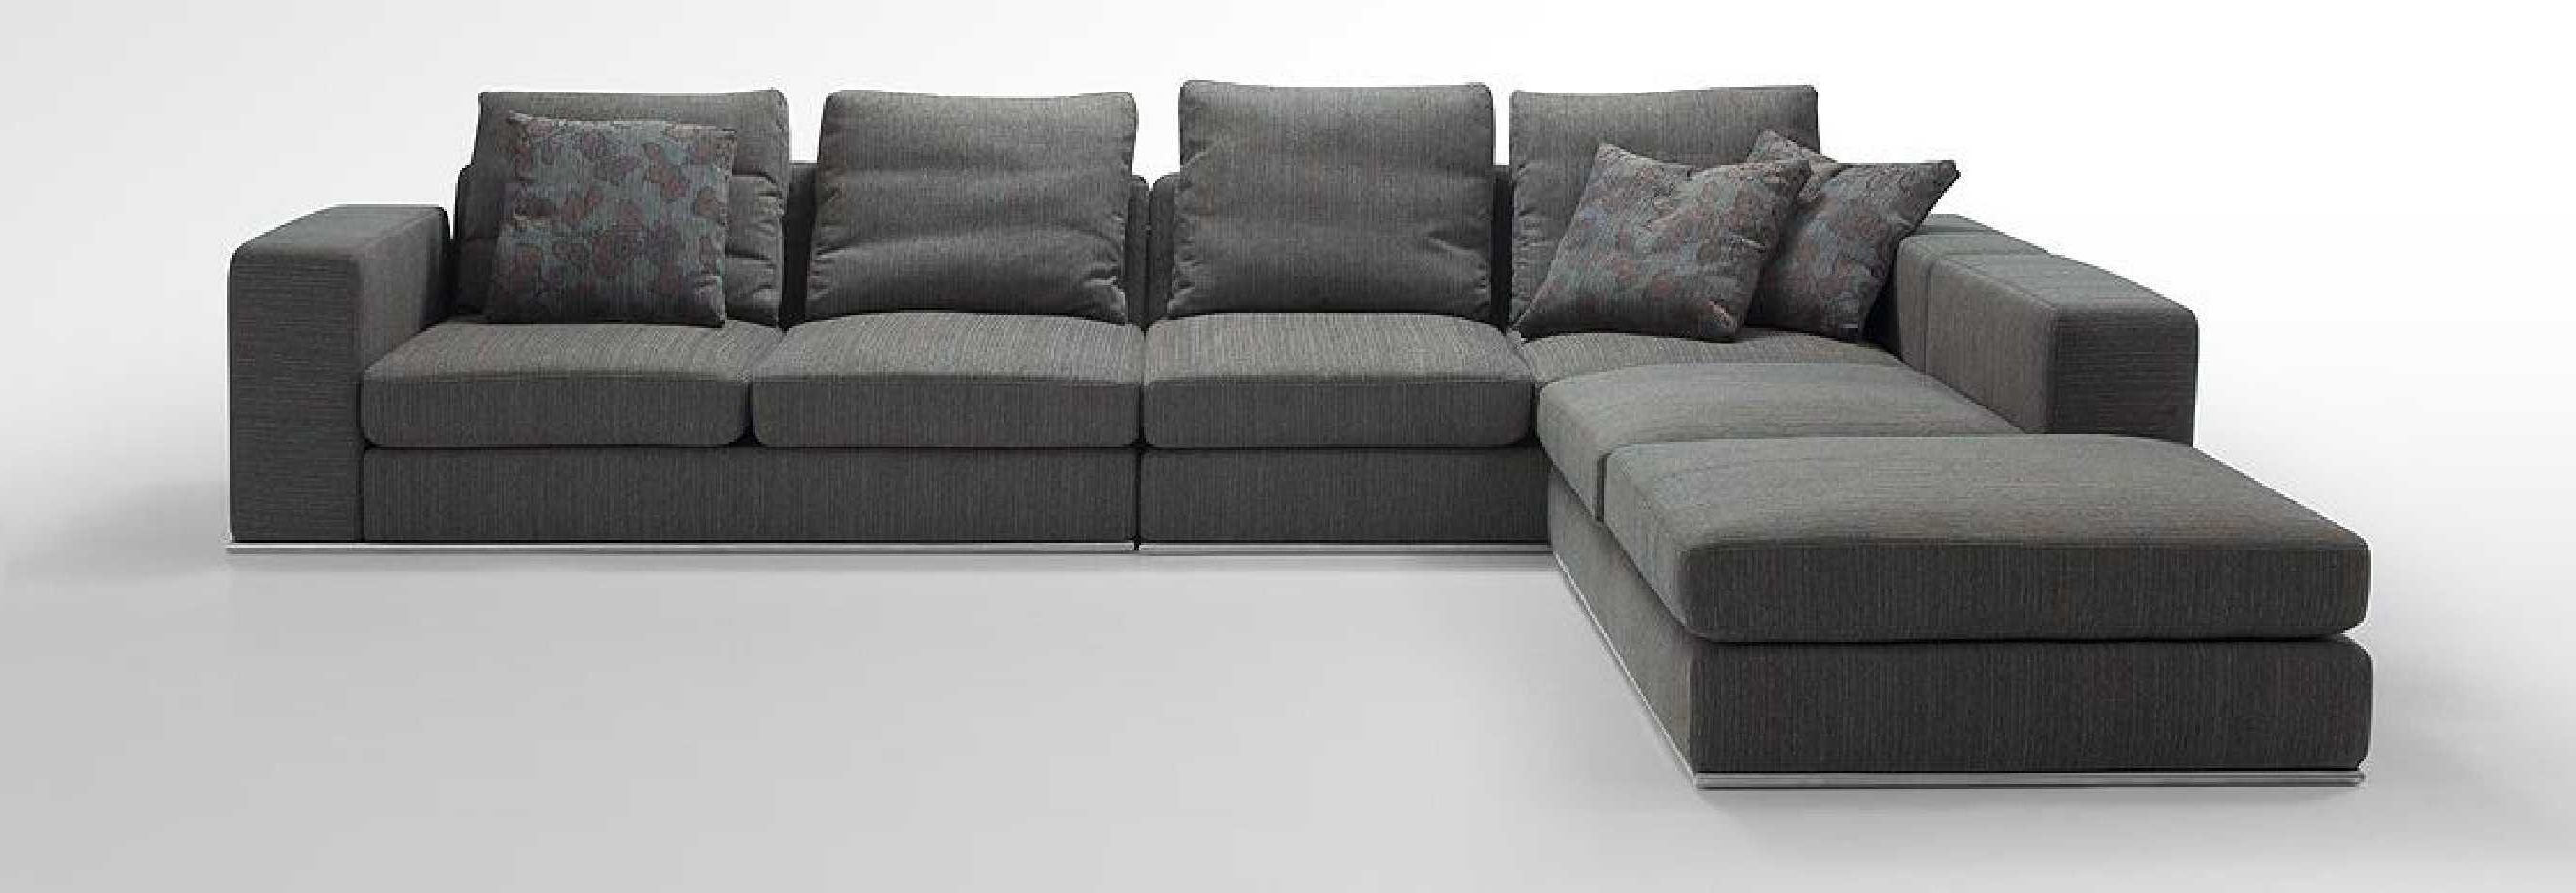 Furniture: Amusing Furniture Decorated L Shaped Sleeper Sofa For Pertaining To Most Recently Released L Shaped Sectional Sleeper Sofas (View 10 of 20)